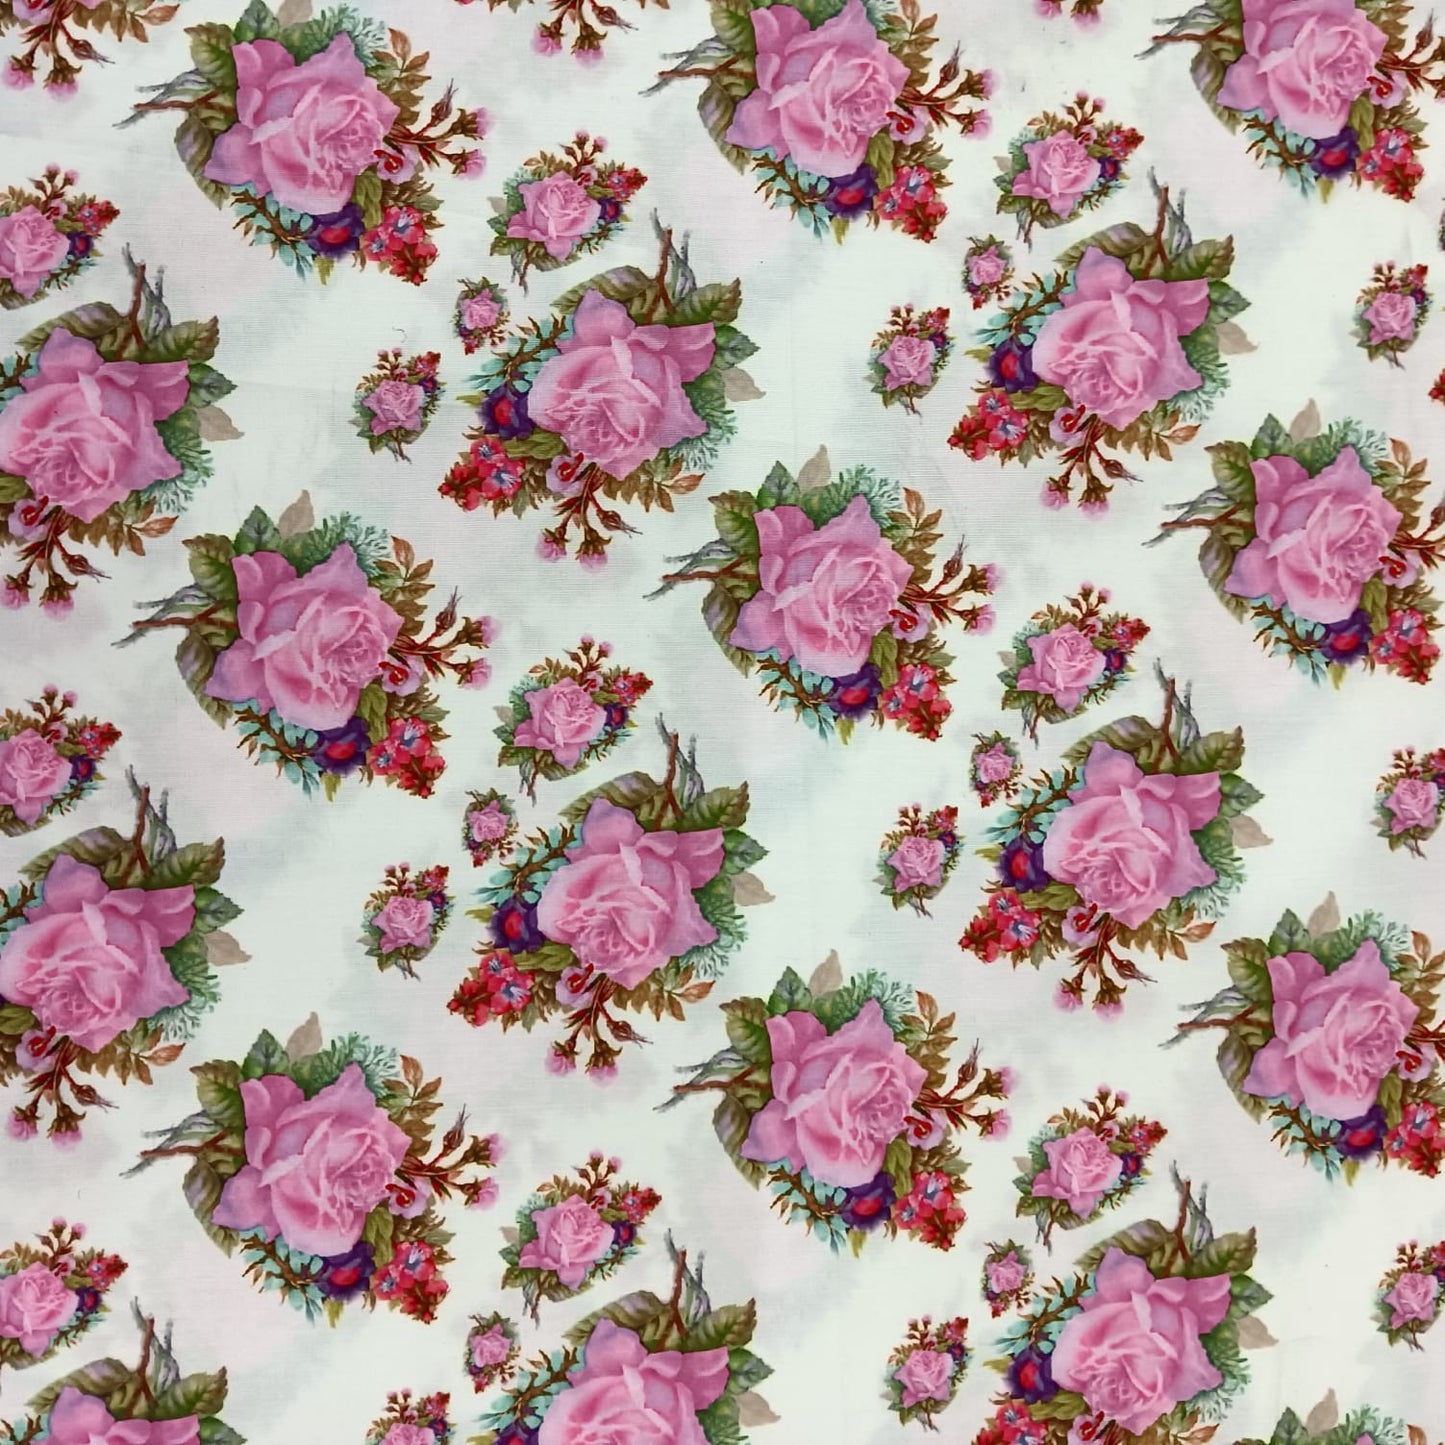 Popline Cotton 58" inch Fabric - pink roses in white base